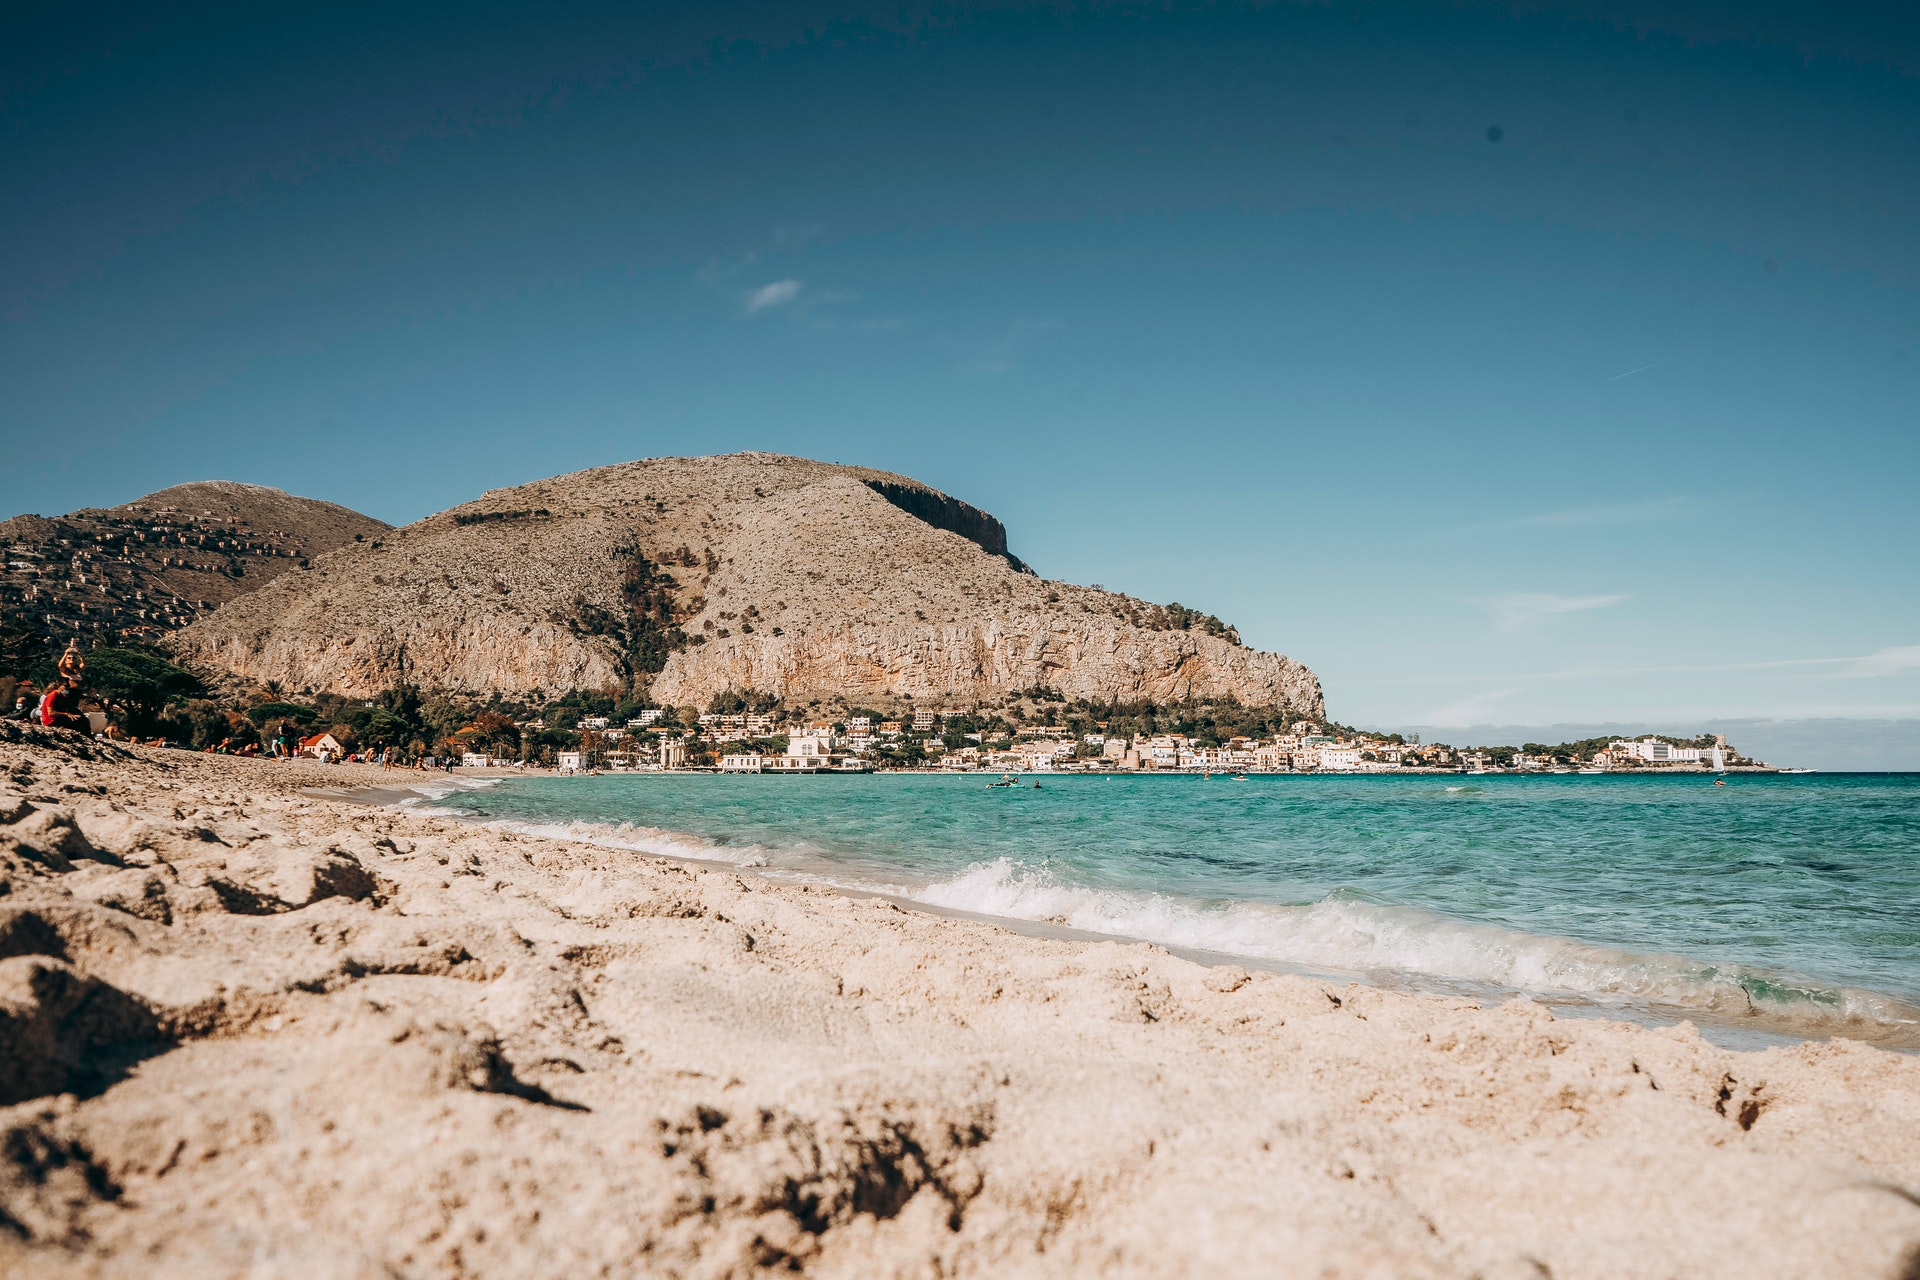 Undiscovered: Sicily with Wanderjack